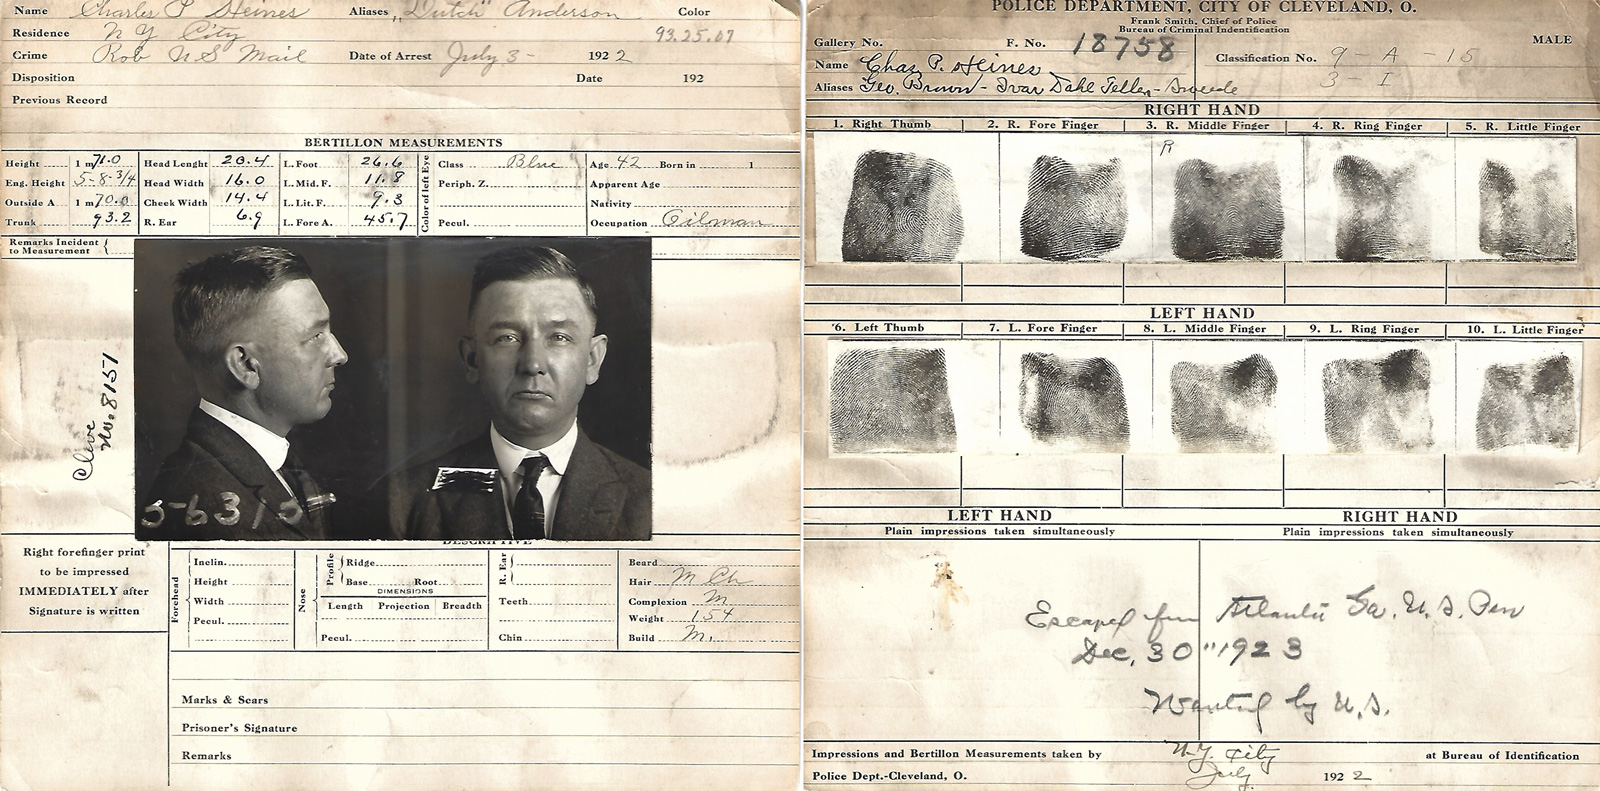 Card showing a White man’s mugshot, fingerprints, and personal information like bodily measurements